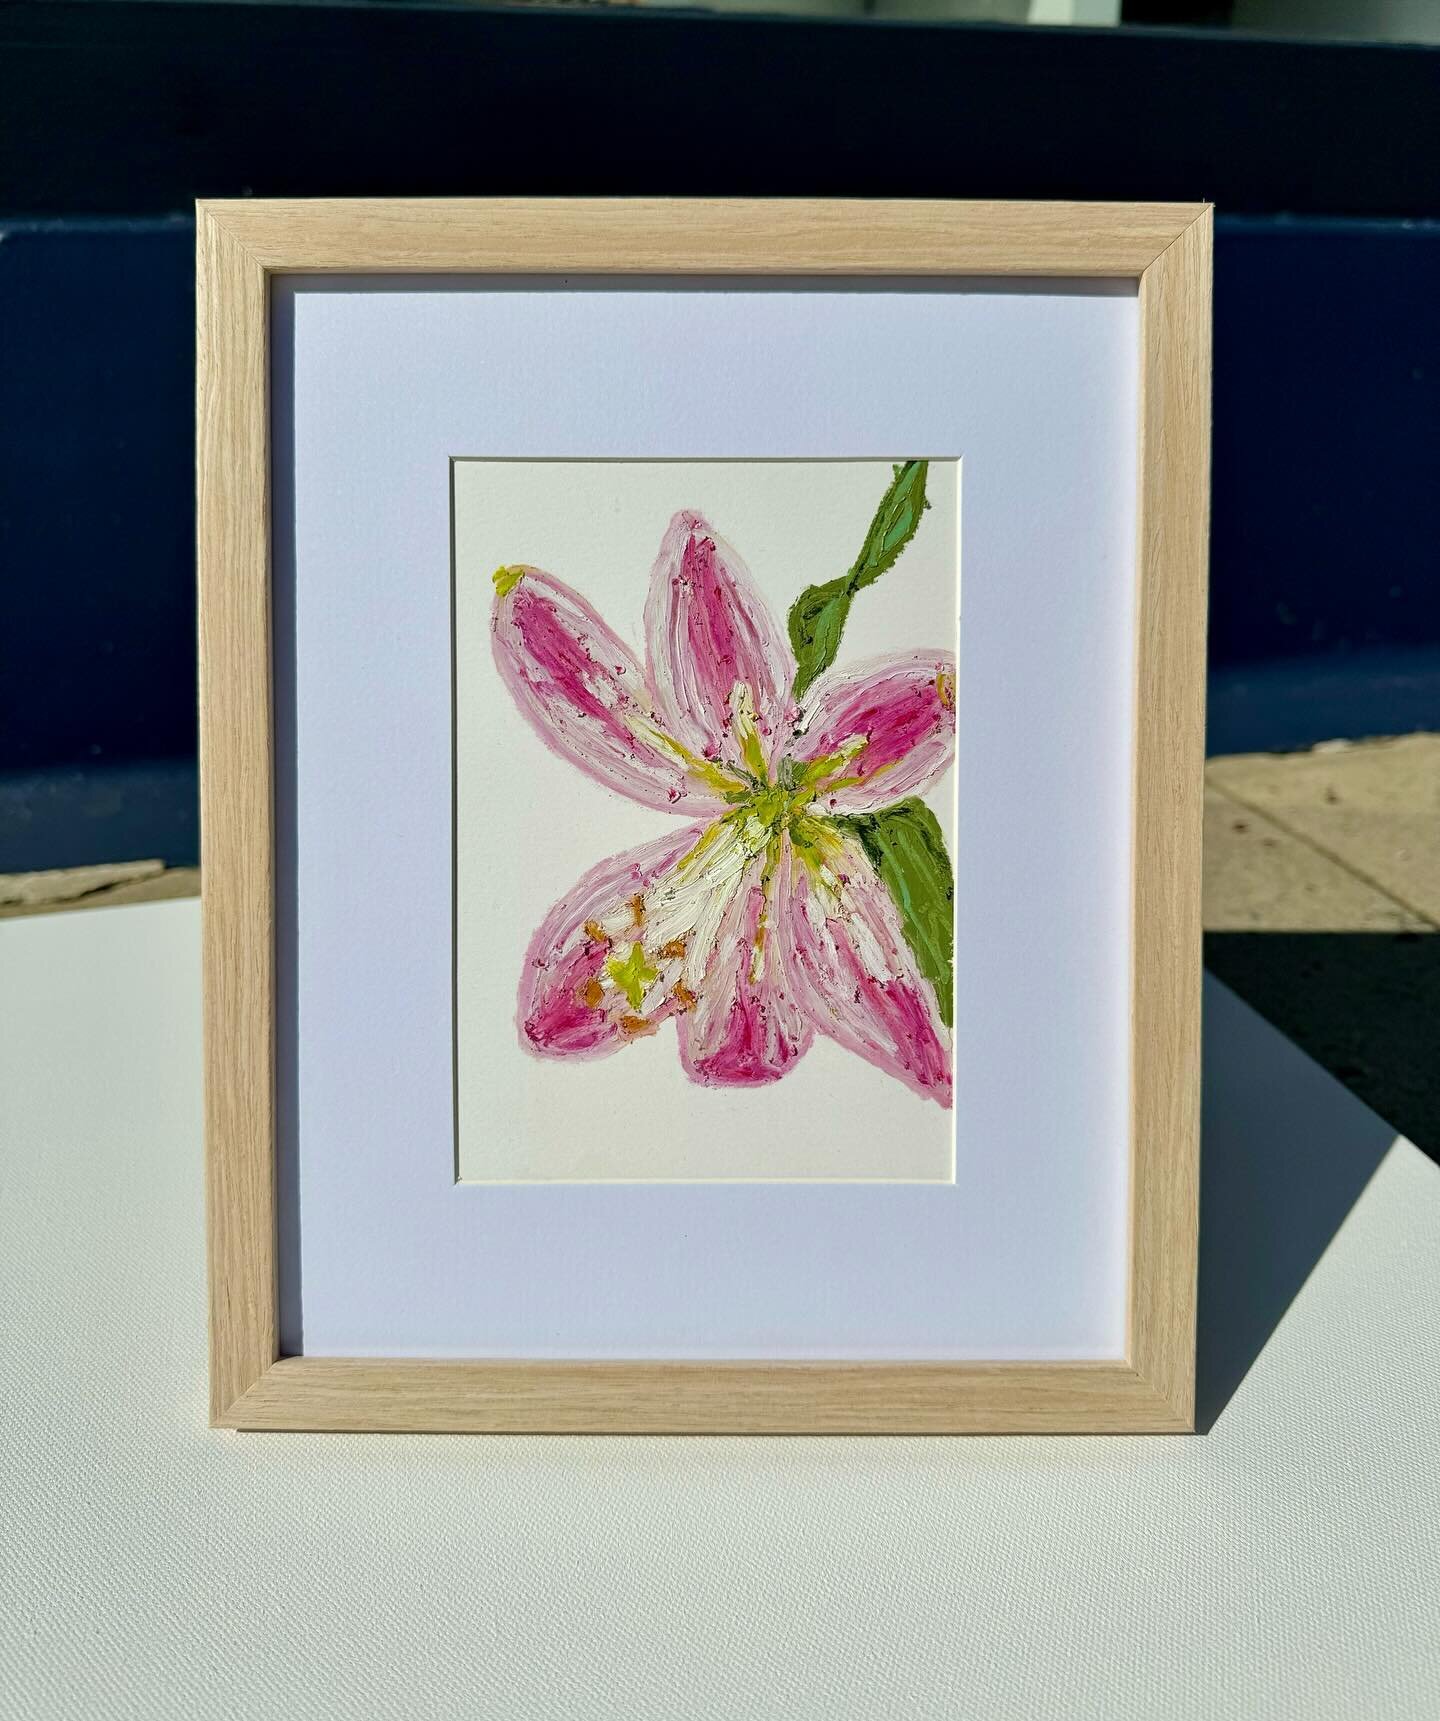 starburst lily - 5x7&rdquo; oil pastel on mixed media paper framed to 8x10&rdquo; | $90, dm me if interested 🌸 
.
.
.
#oilpastelpainting #flowerpainting #lilypainting #instaartist #creativelife #originalart #homedecor